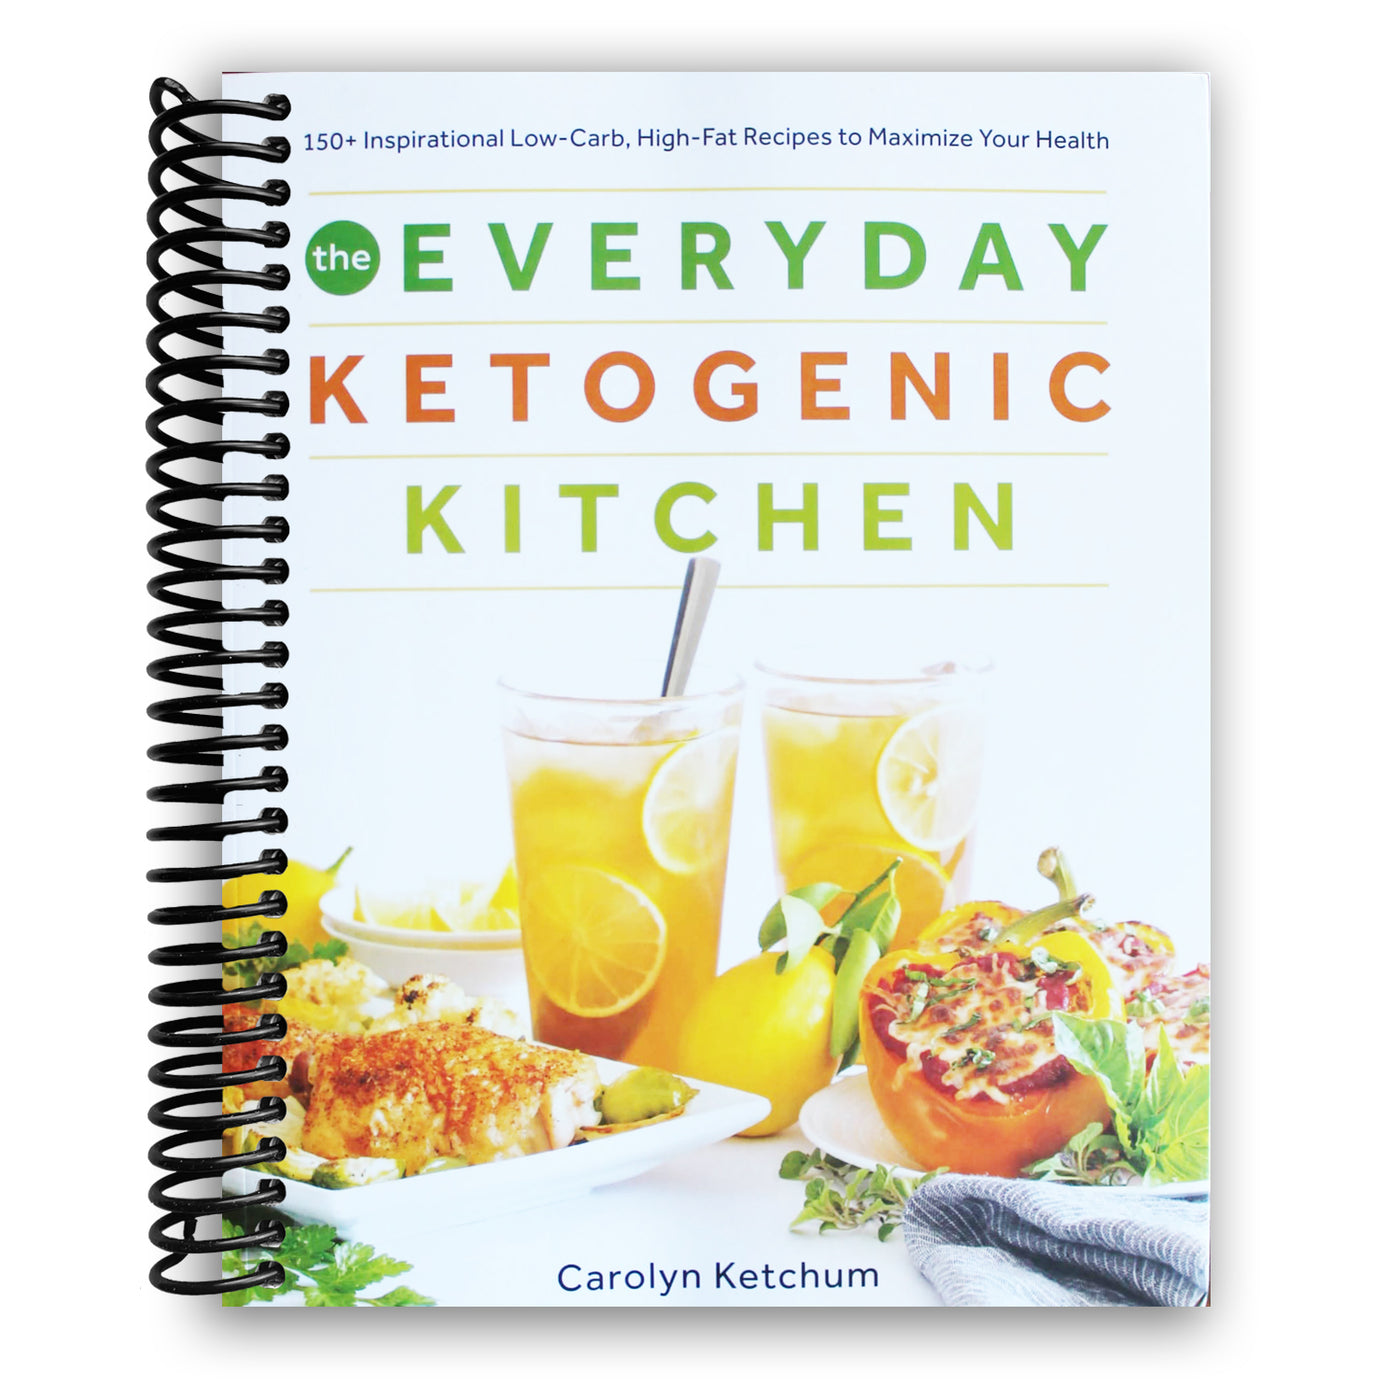 The Everyday Ketogenic Kitchen: With More than 150 Inspirational Low-Carb, High-Fat Recipes to Maximize Your Health (Spiral Bound)